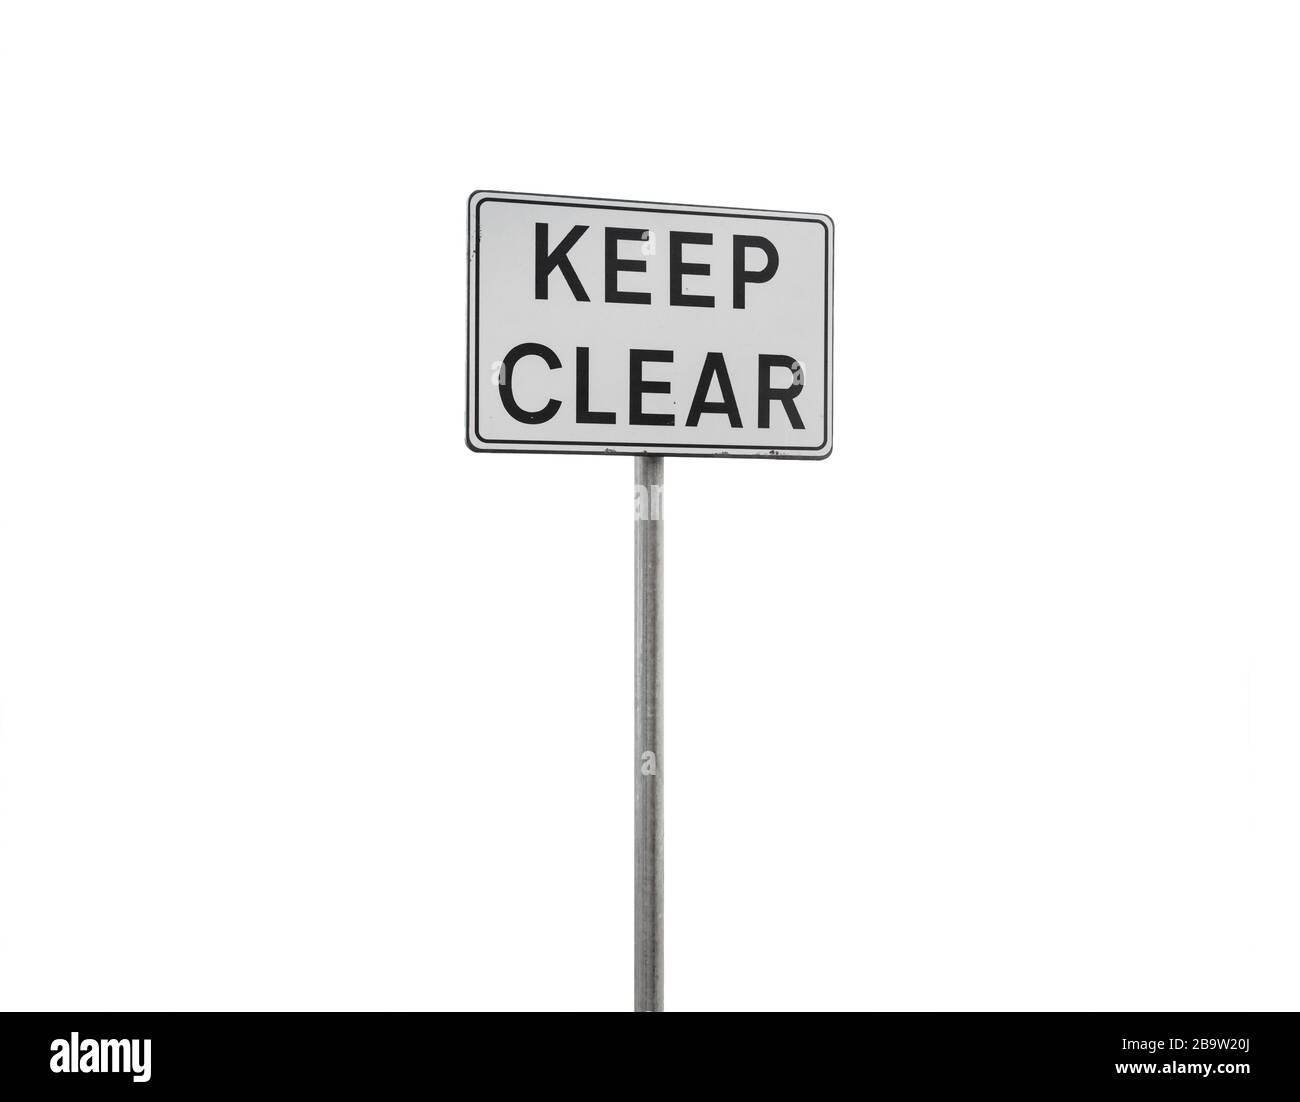 Keep clear. Caution sign on a metal pole isolated on white background Stock Photo